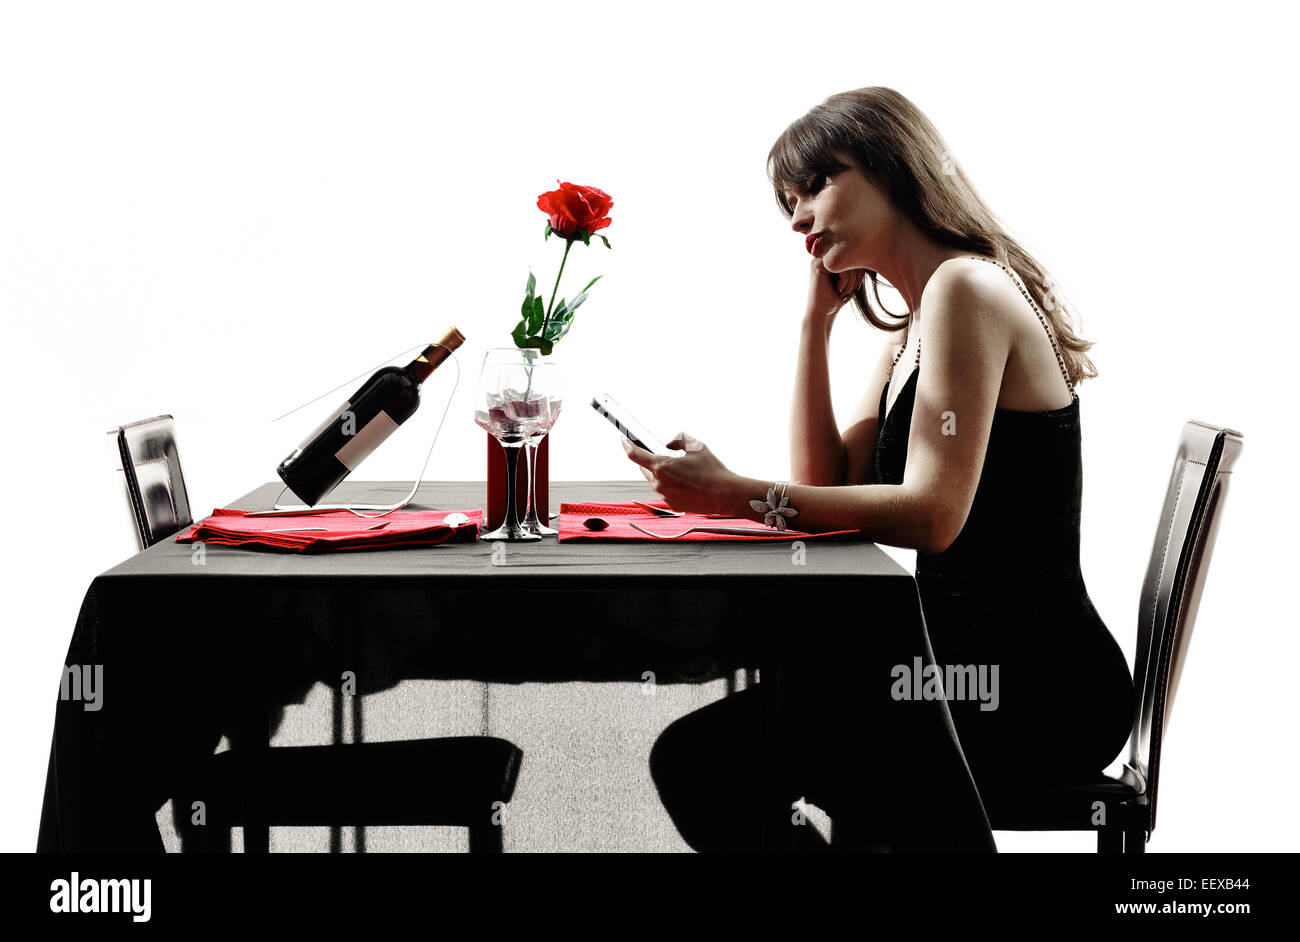 one woman waiting dinning in silhouettes on white background Stock Photo